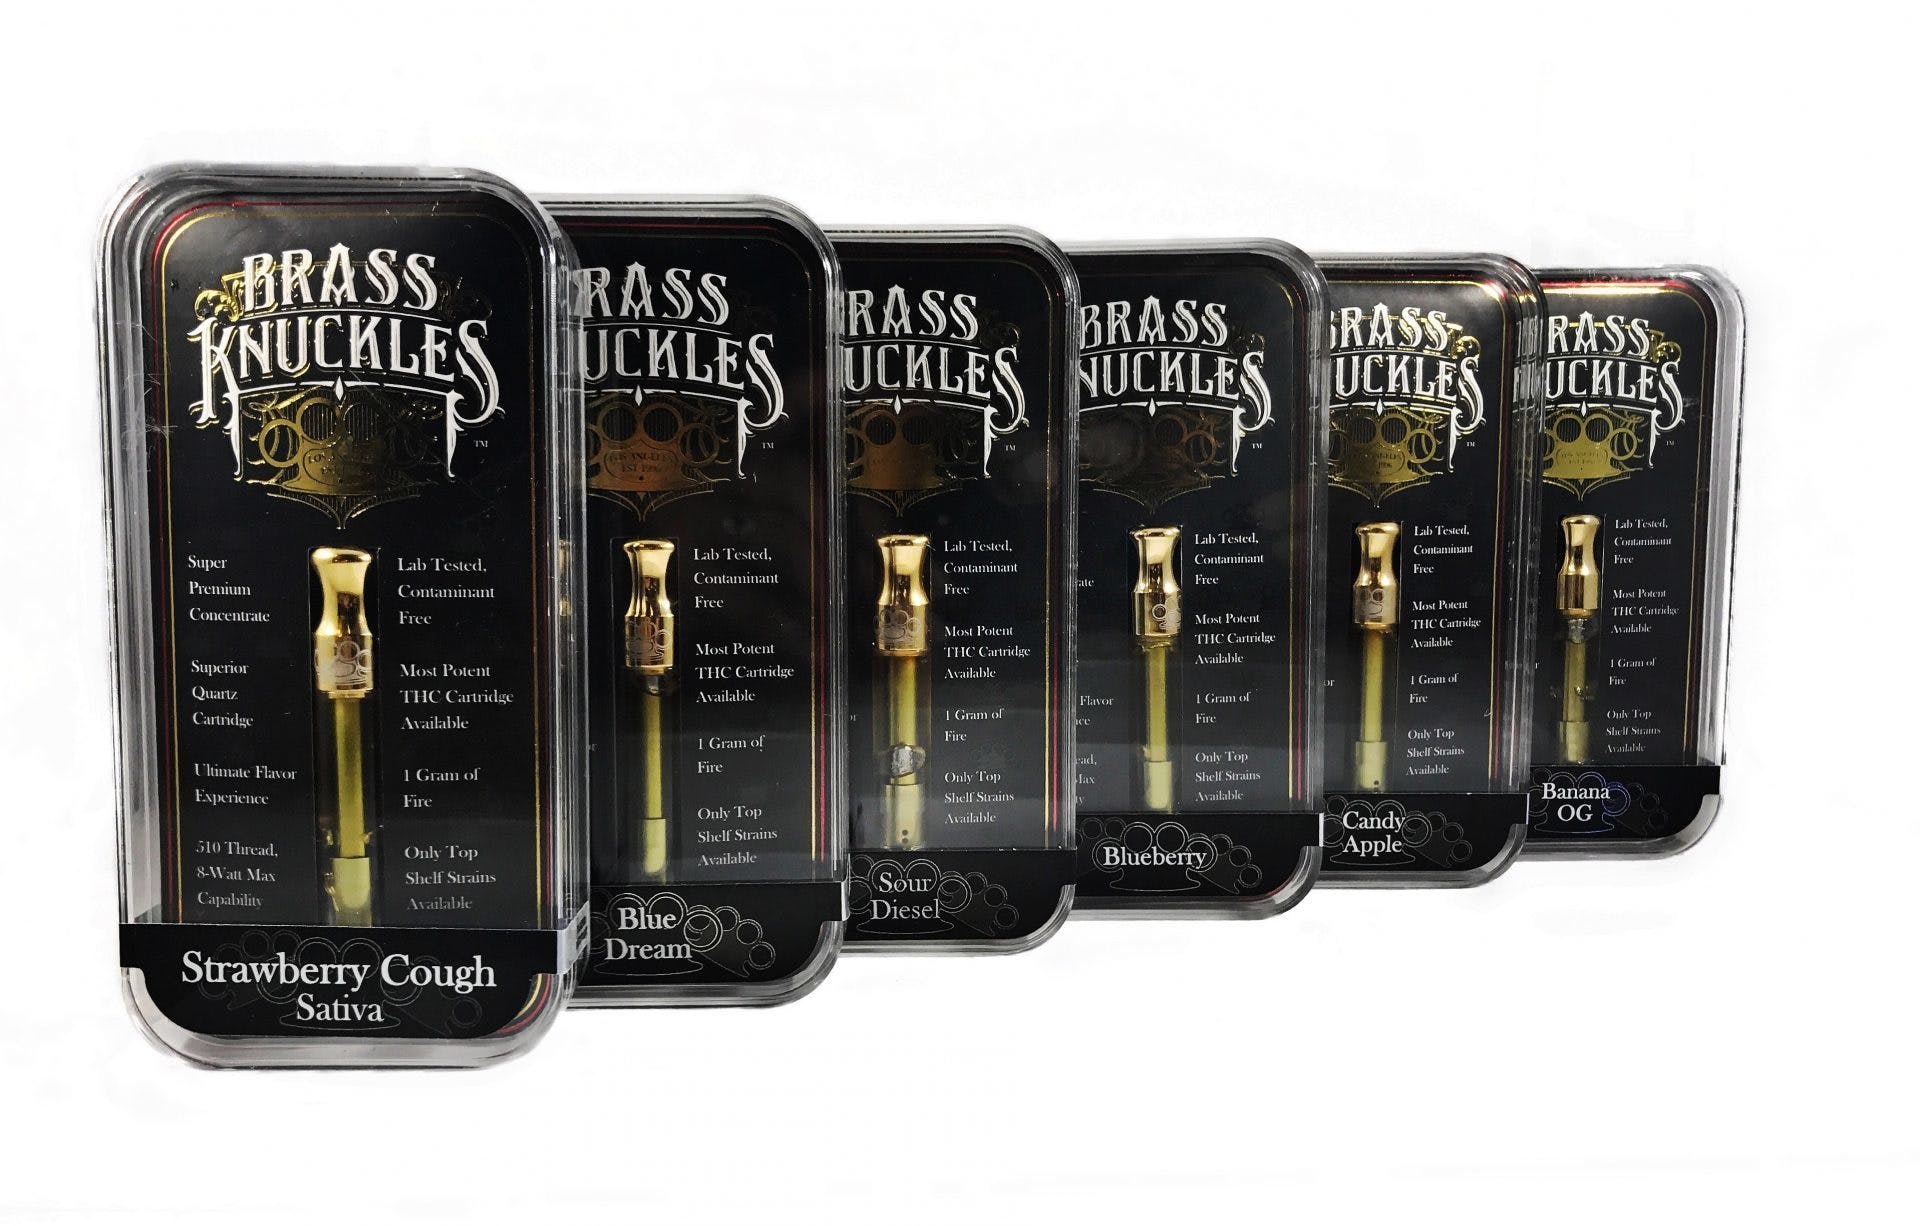 concentrate-brass-knuckles-sour-diesel-3-for-only-90-21-mix-and-match